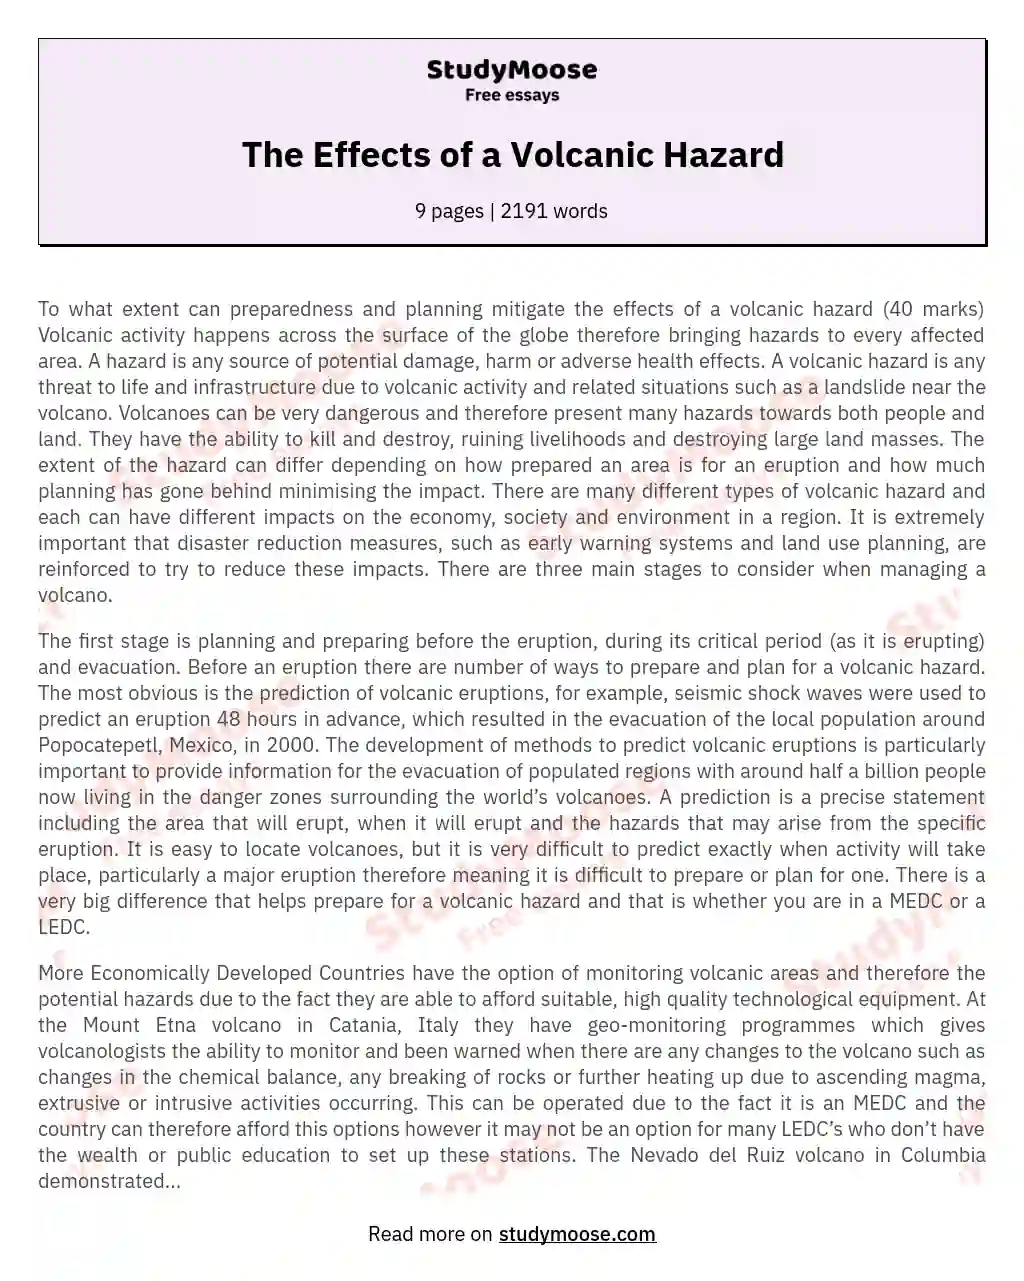 The Effects of a Volcanic Hazard essay